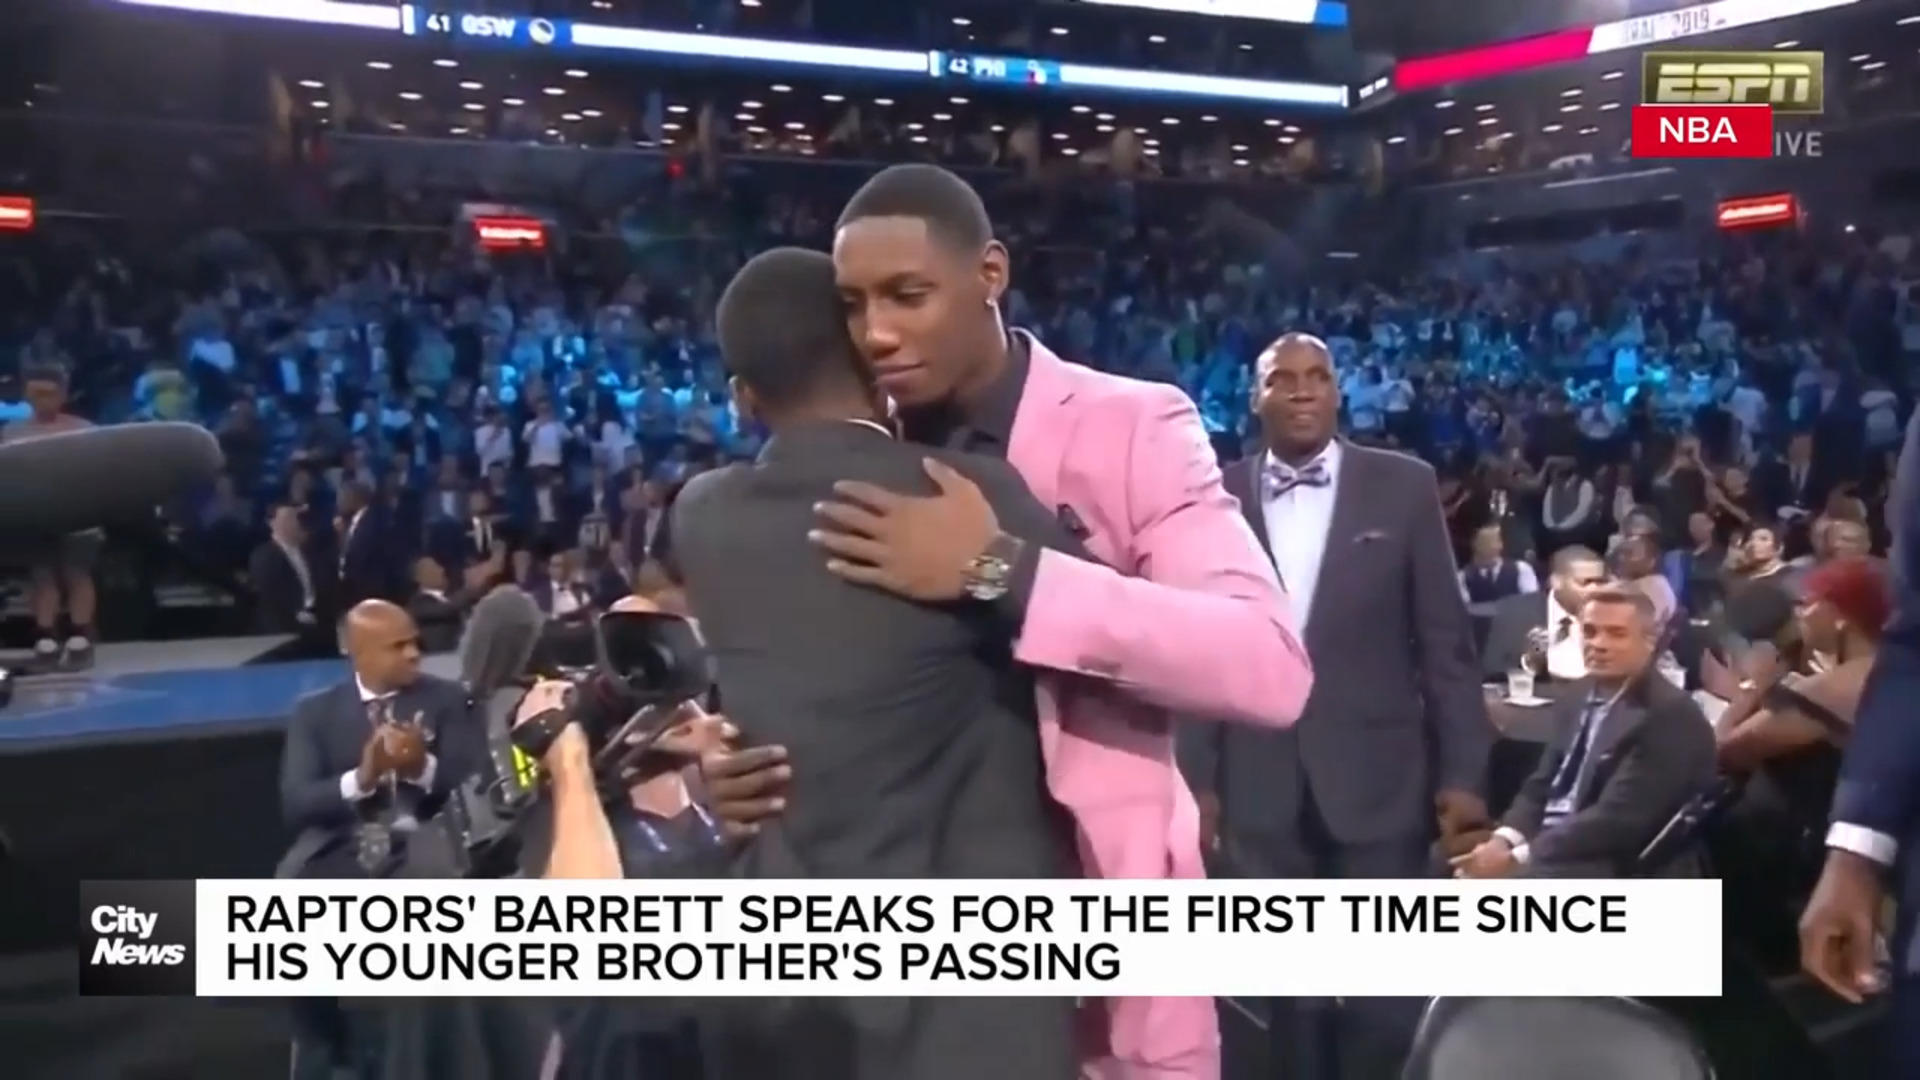 Emotional RJ Barrett speaks to media for first time since younger brothers passing